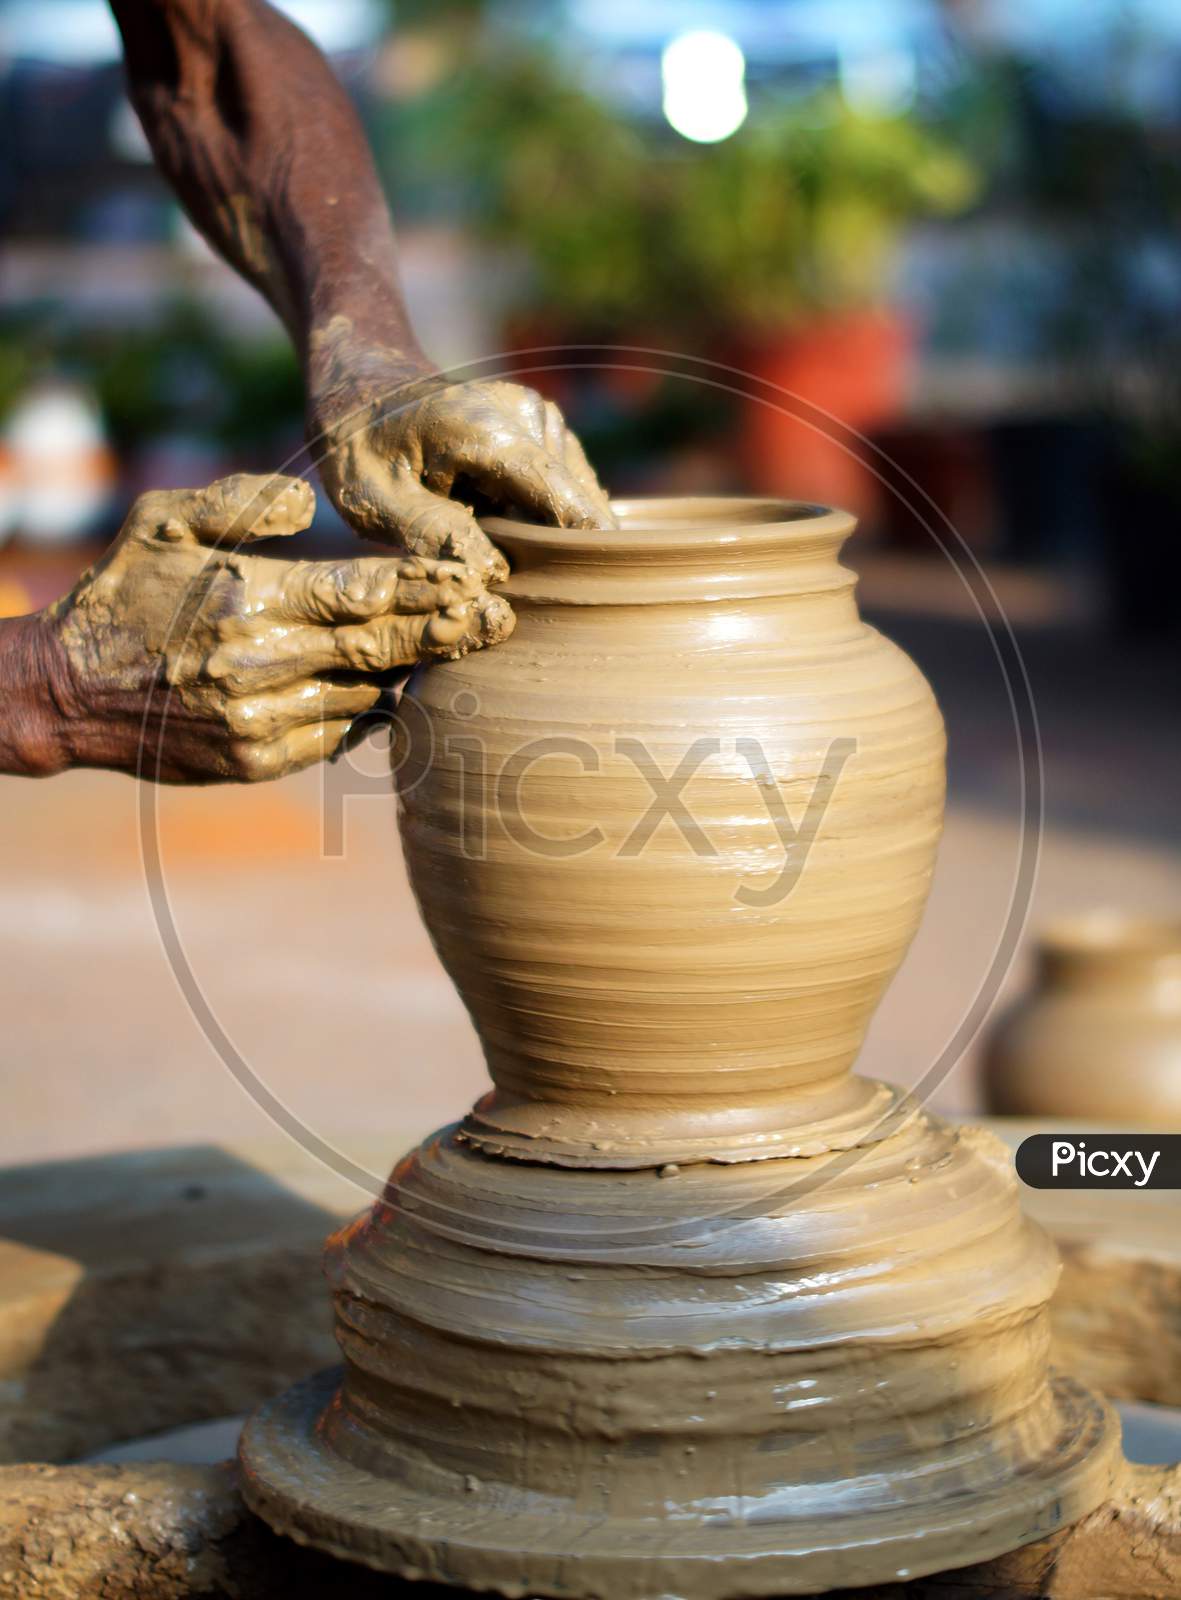 Stock Photo Of Potter Making A Eathen Vase On The Wheel In Outdoors